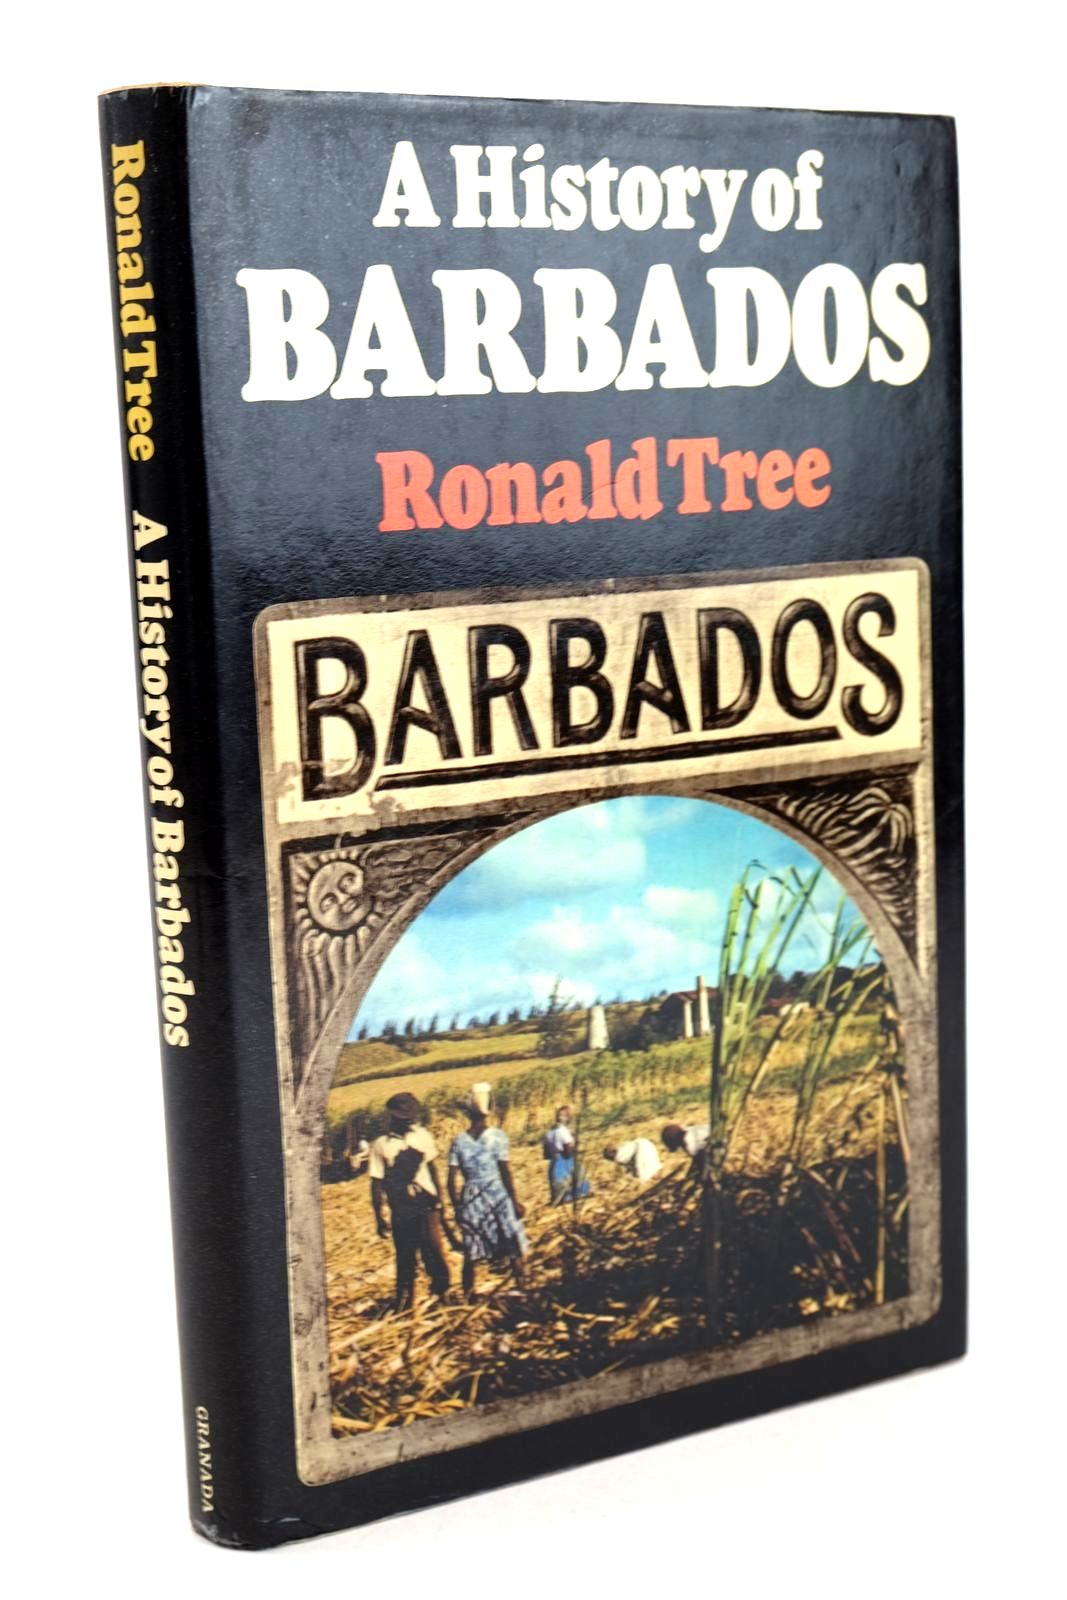 Photo of A HISTORY OF BARBADOS written by Tree, Ronald Cozier, E.L. published by Granada (STOCK CODE: 1327707)  for sale by Stella & Rose's Books